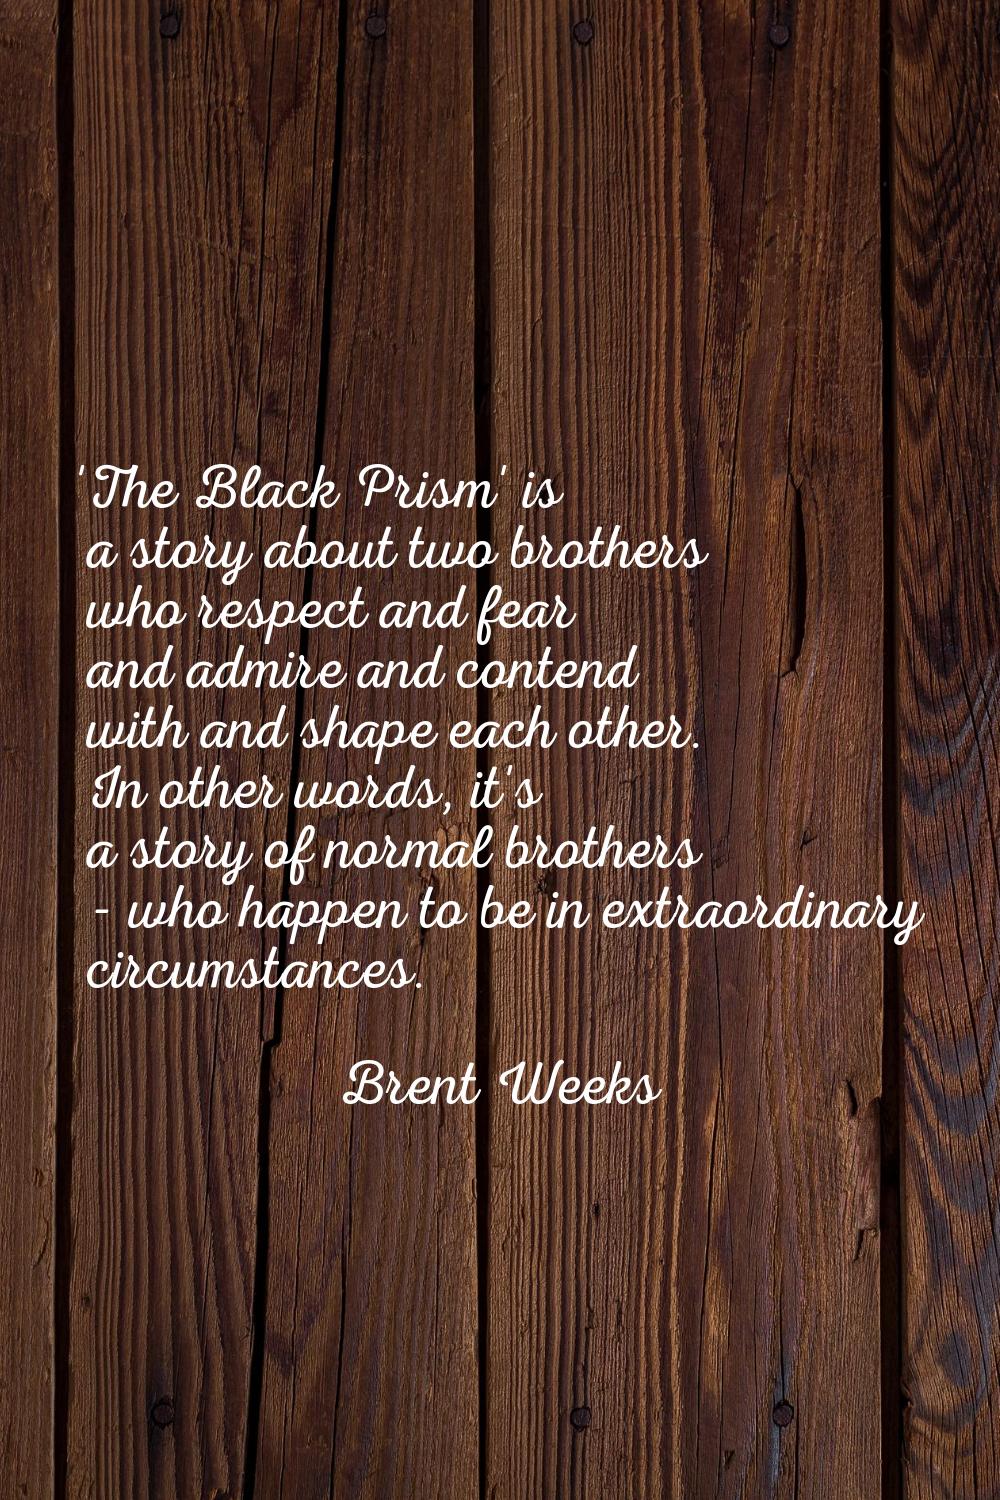 'The Black Prism' is a story about two brothers who respect and fear and admire and contend with an